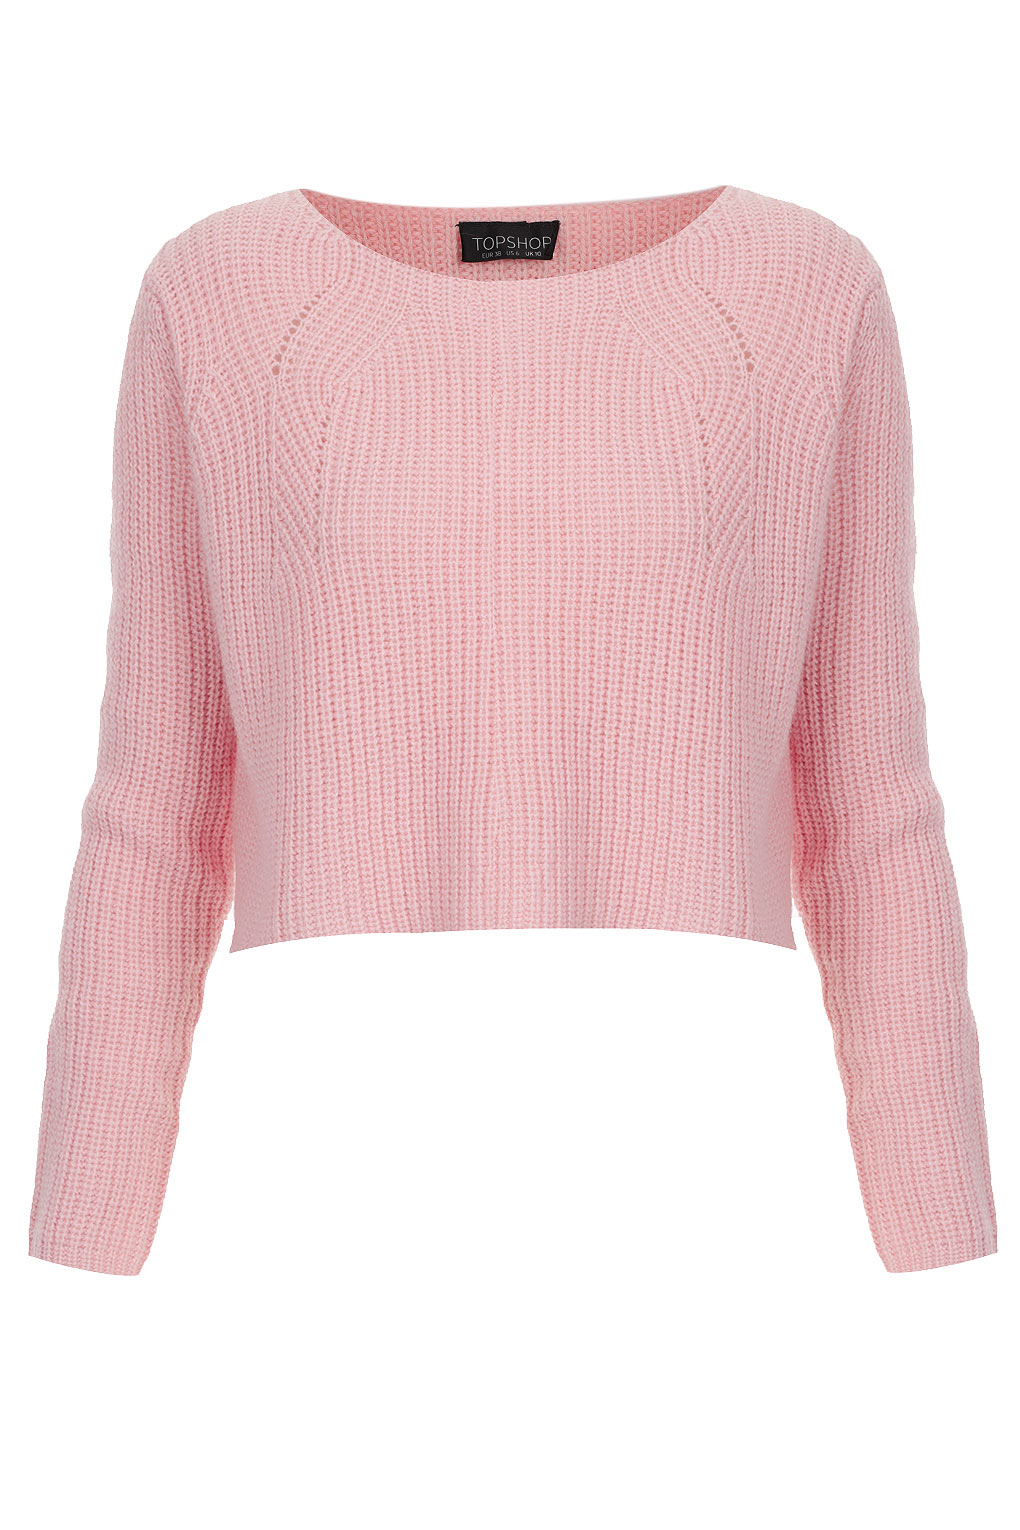 Lyst - Topshop Knitted Clean Rib Crop Jumper in Pink